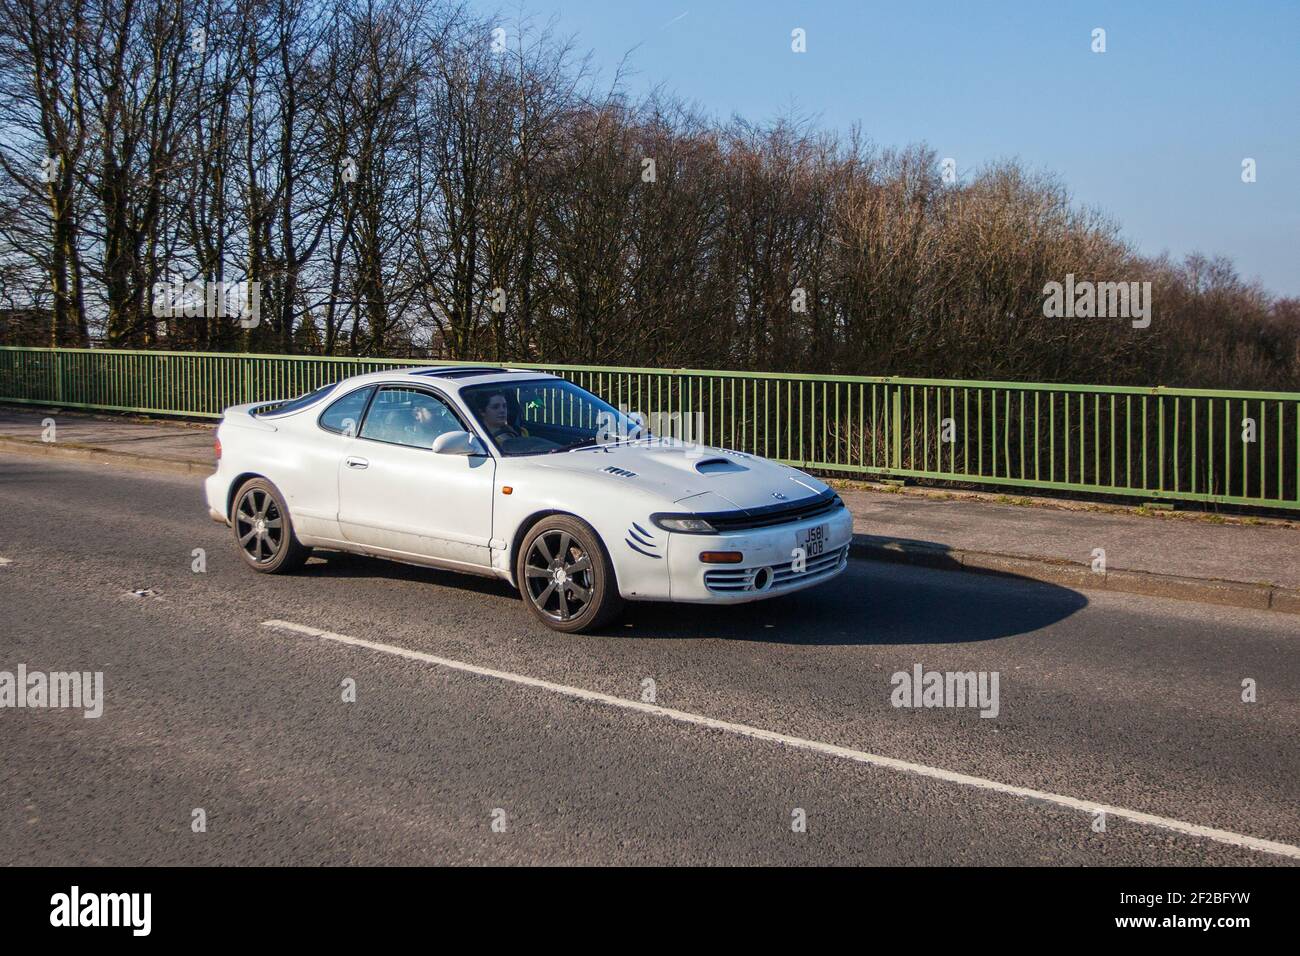 1992 90s white 2000cc Toyota Celica Gt-4; Vehicular traffic, moving vehicles, cars, vehicle driving on UK roads, motors, motoring on the M6 motorway highway road network Stock Photo